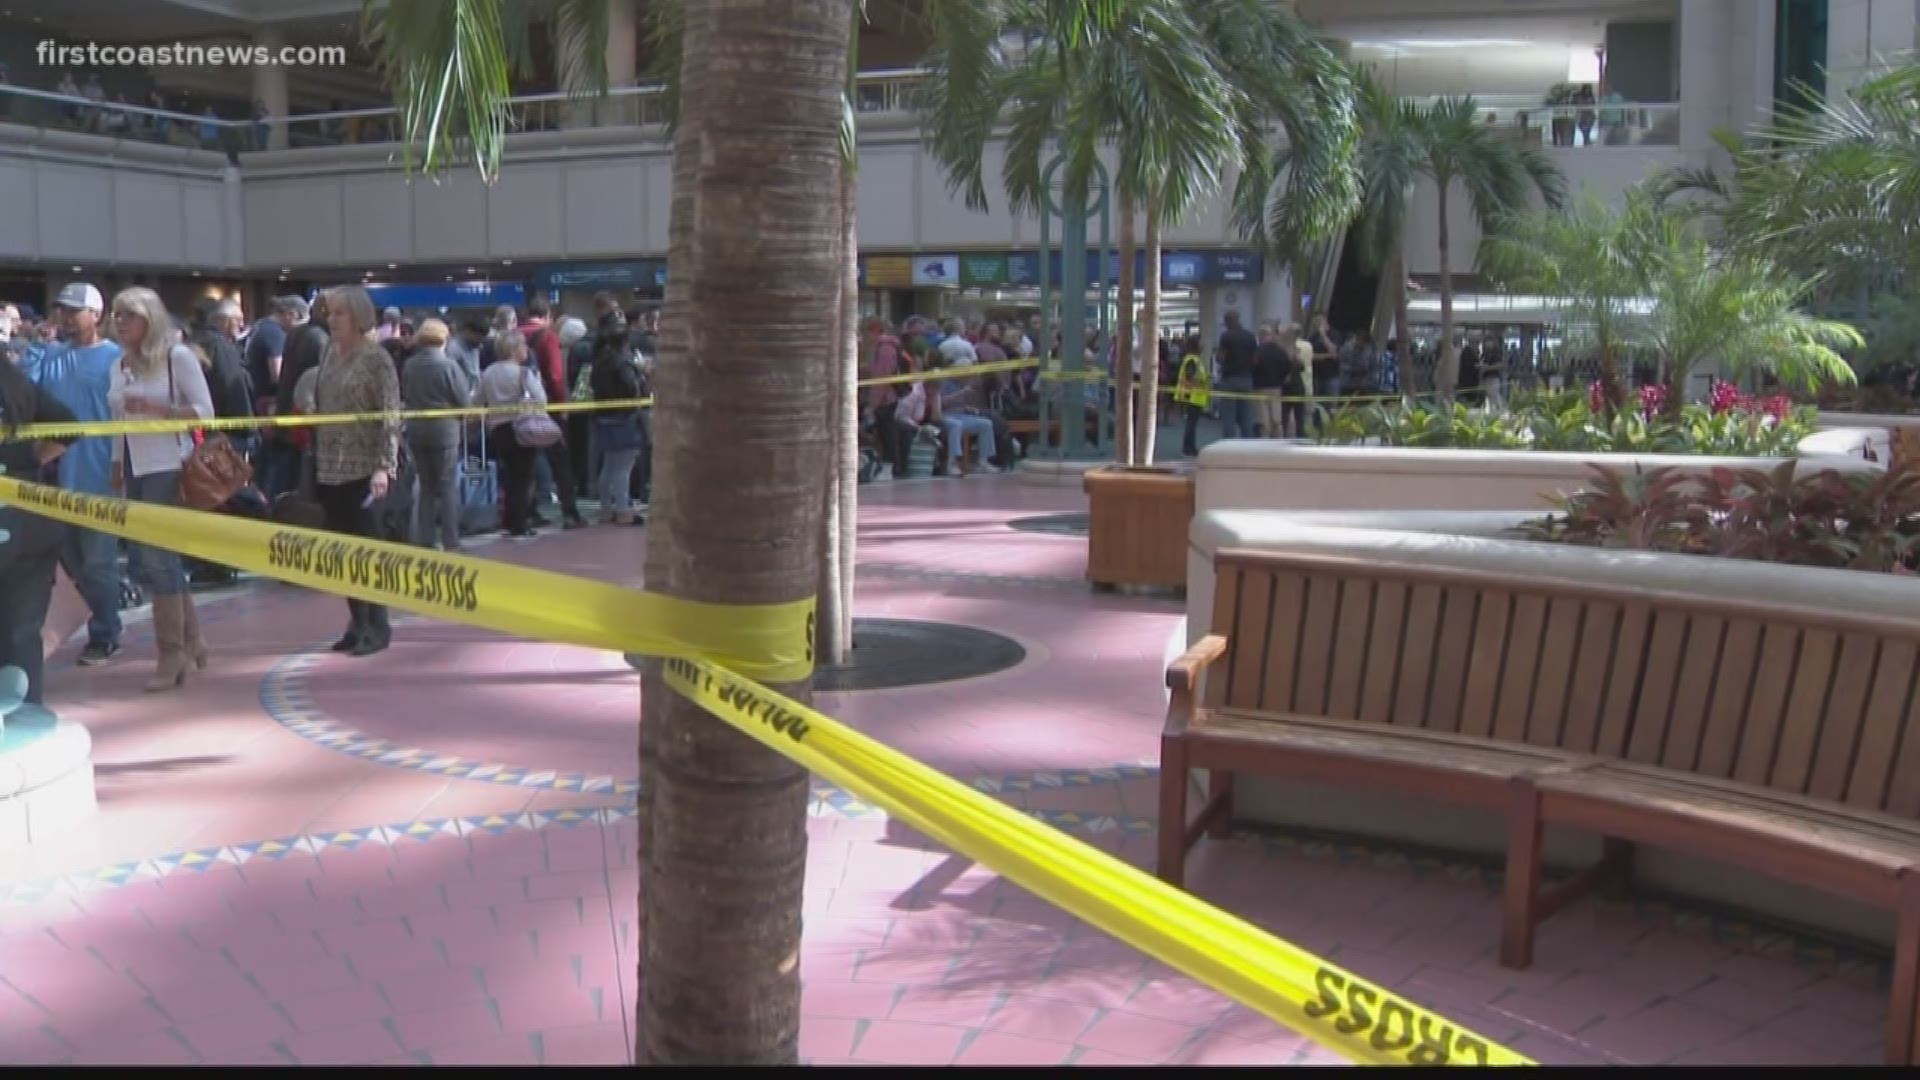 The death of a TSA agent by suicide prompted flight delays at Orlando International Airport.